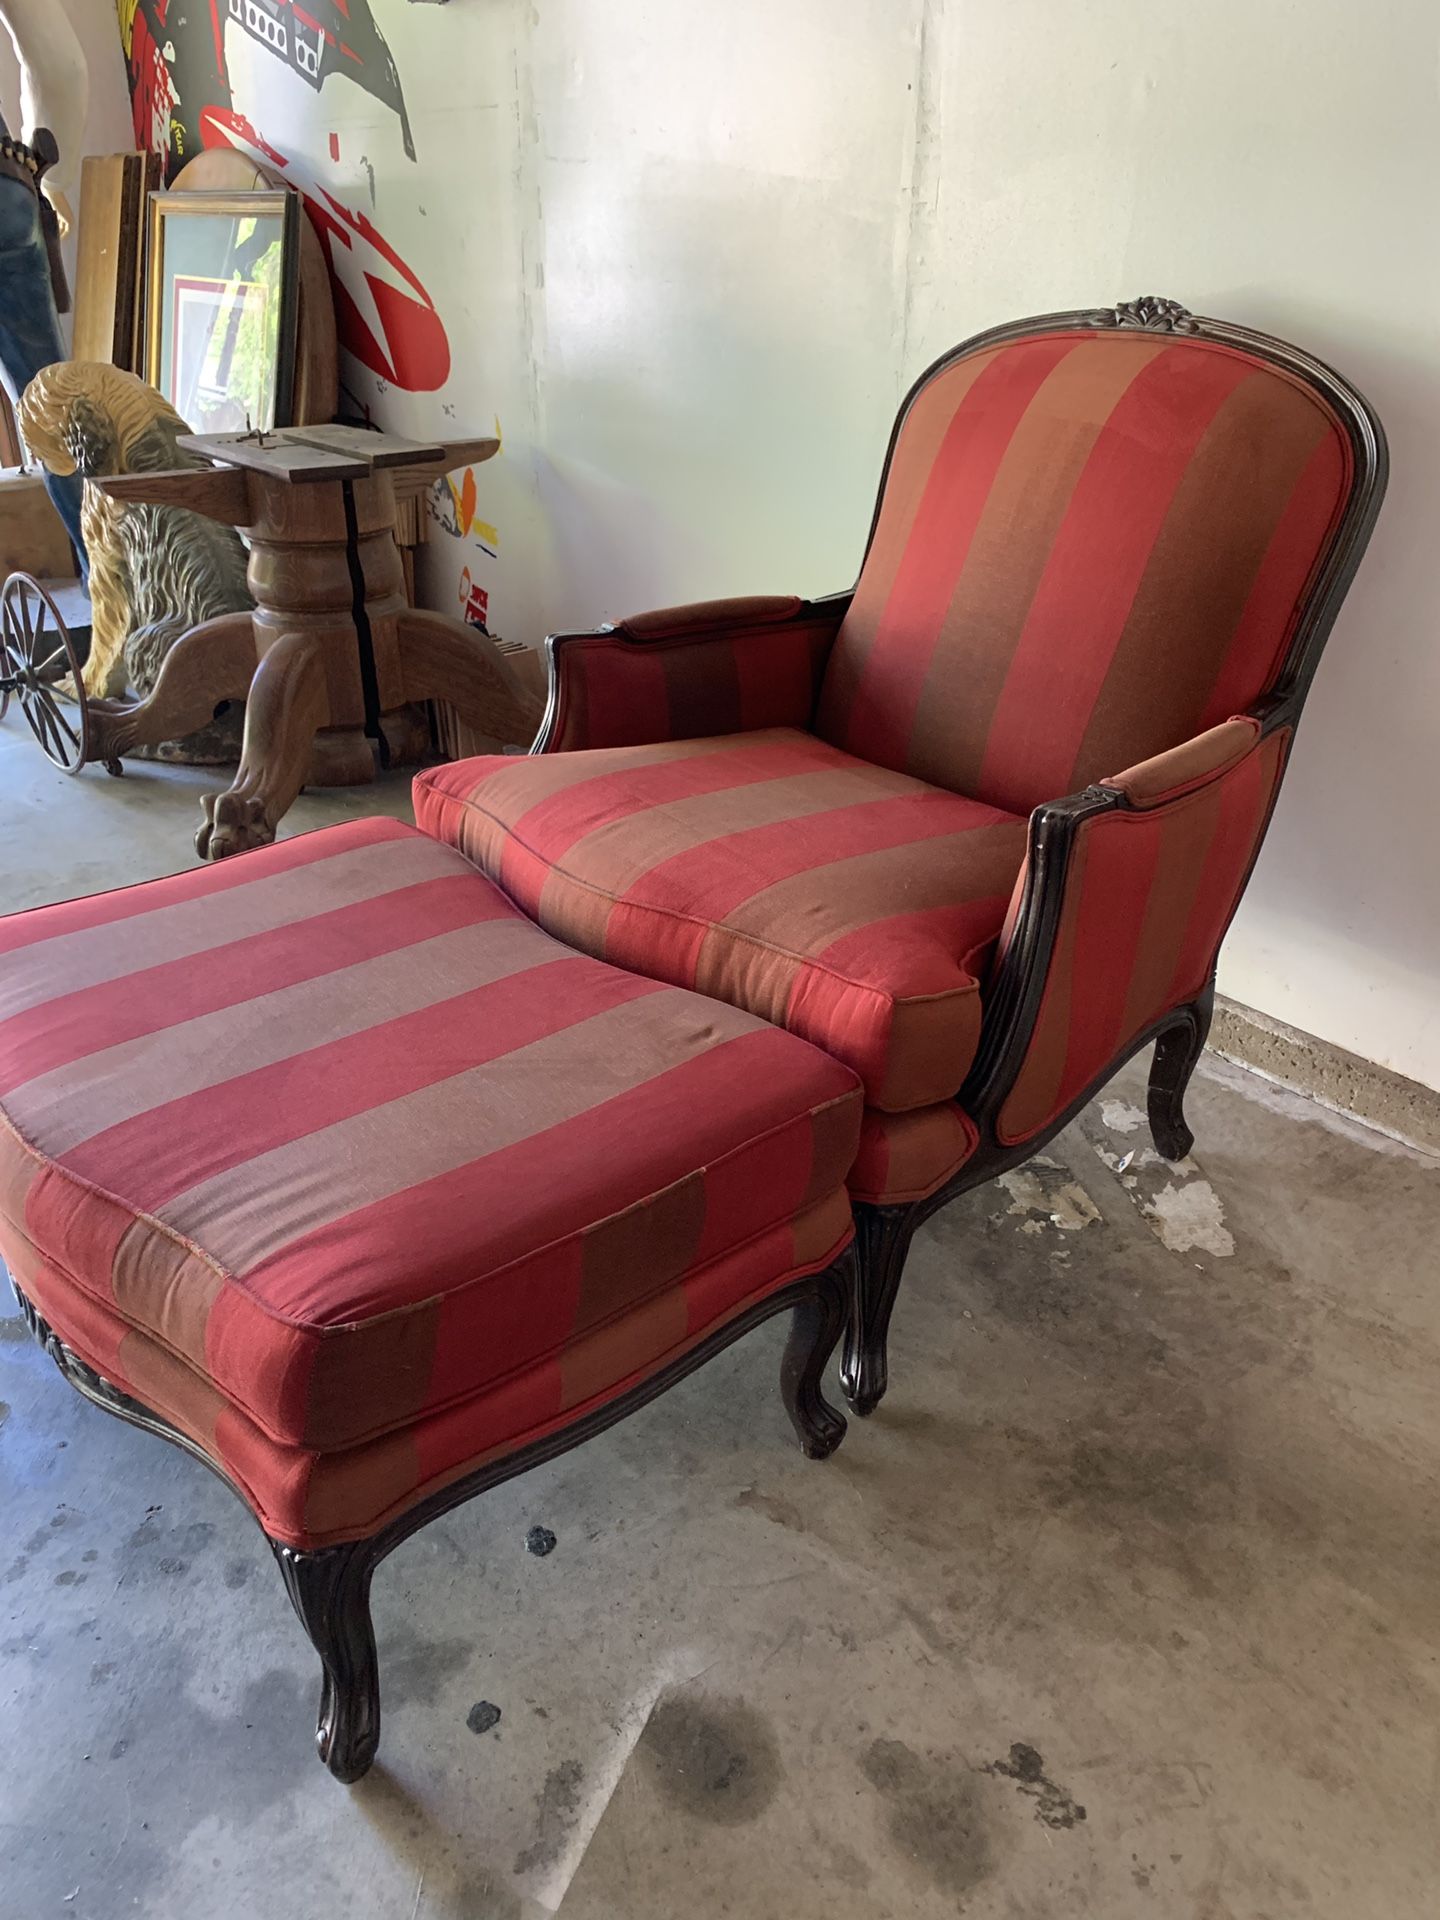 Red striped oversized chair with ottoman